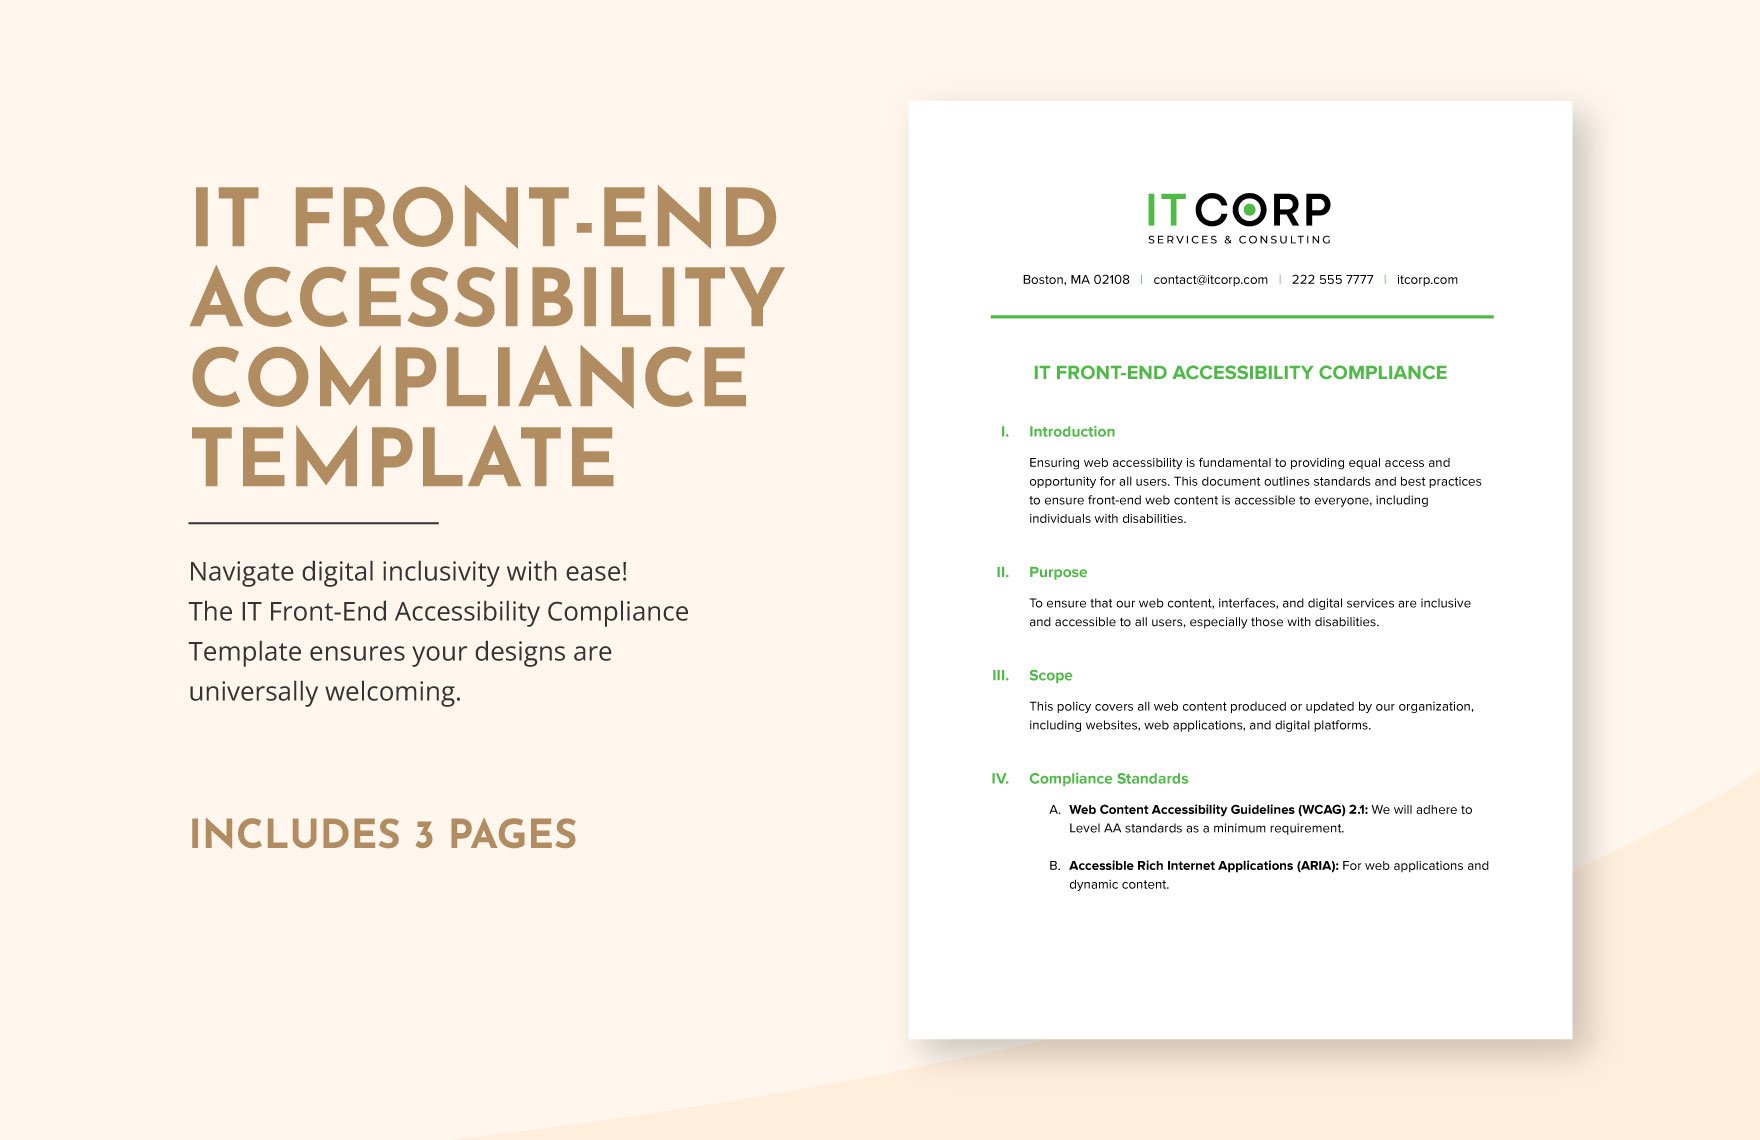 IT Front-End Accessibility Compliance Template